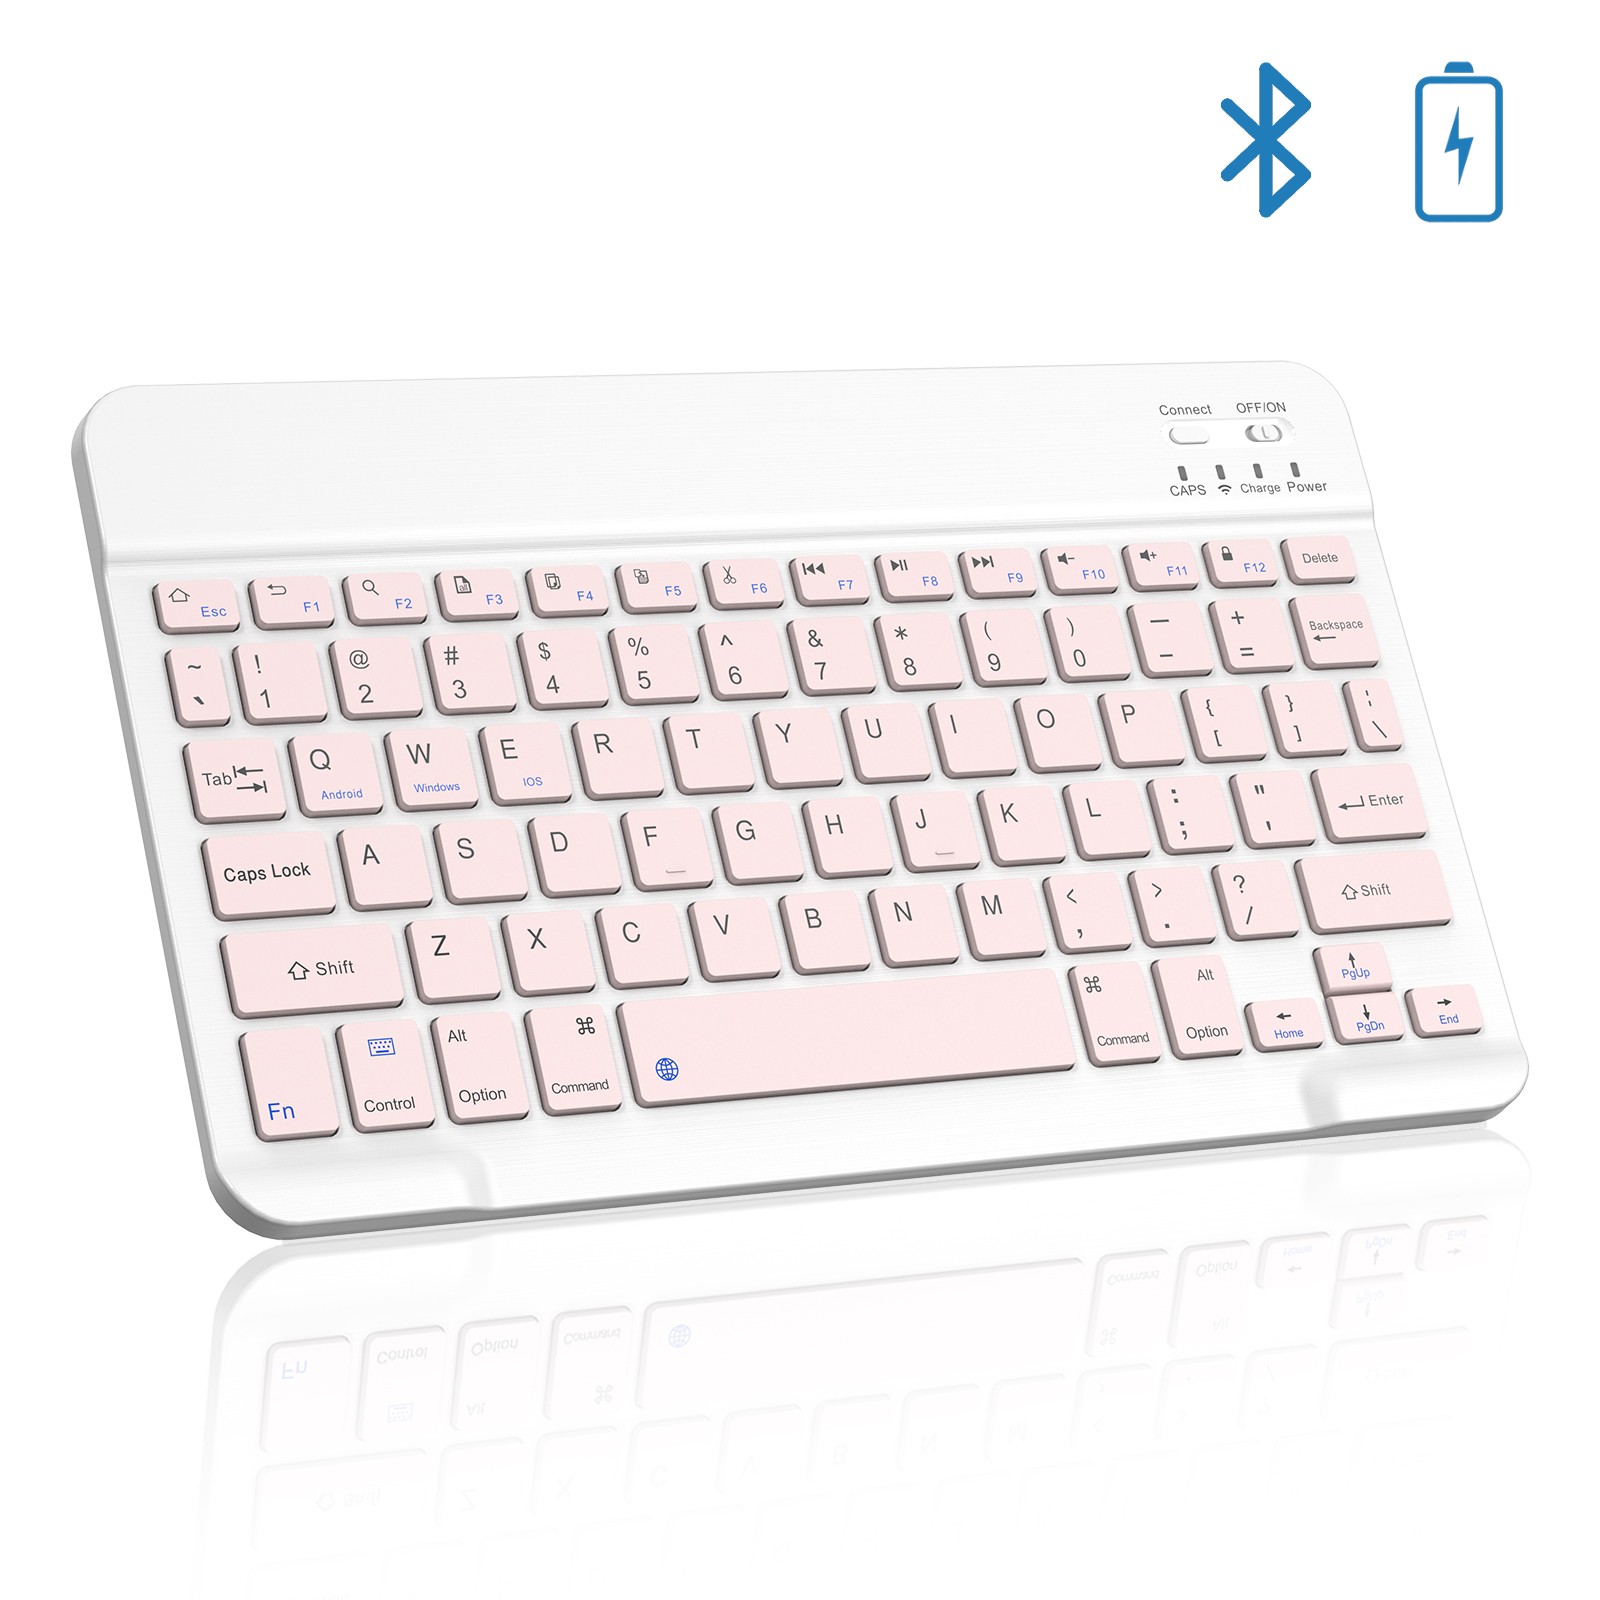 Cimetech Bluetooth Keyboard, Ultra-Slim Wireless Keyboard Quiet Portable Design with Built-in Rechargeable Battery for IOS, Mac, iPad, Windows and Android 3.0 and Above OS Pink - image 1 of 8